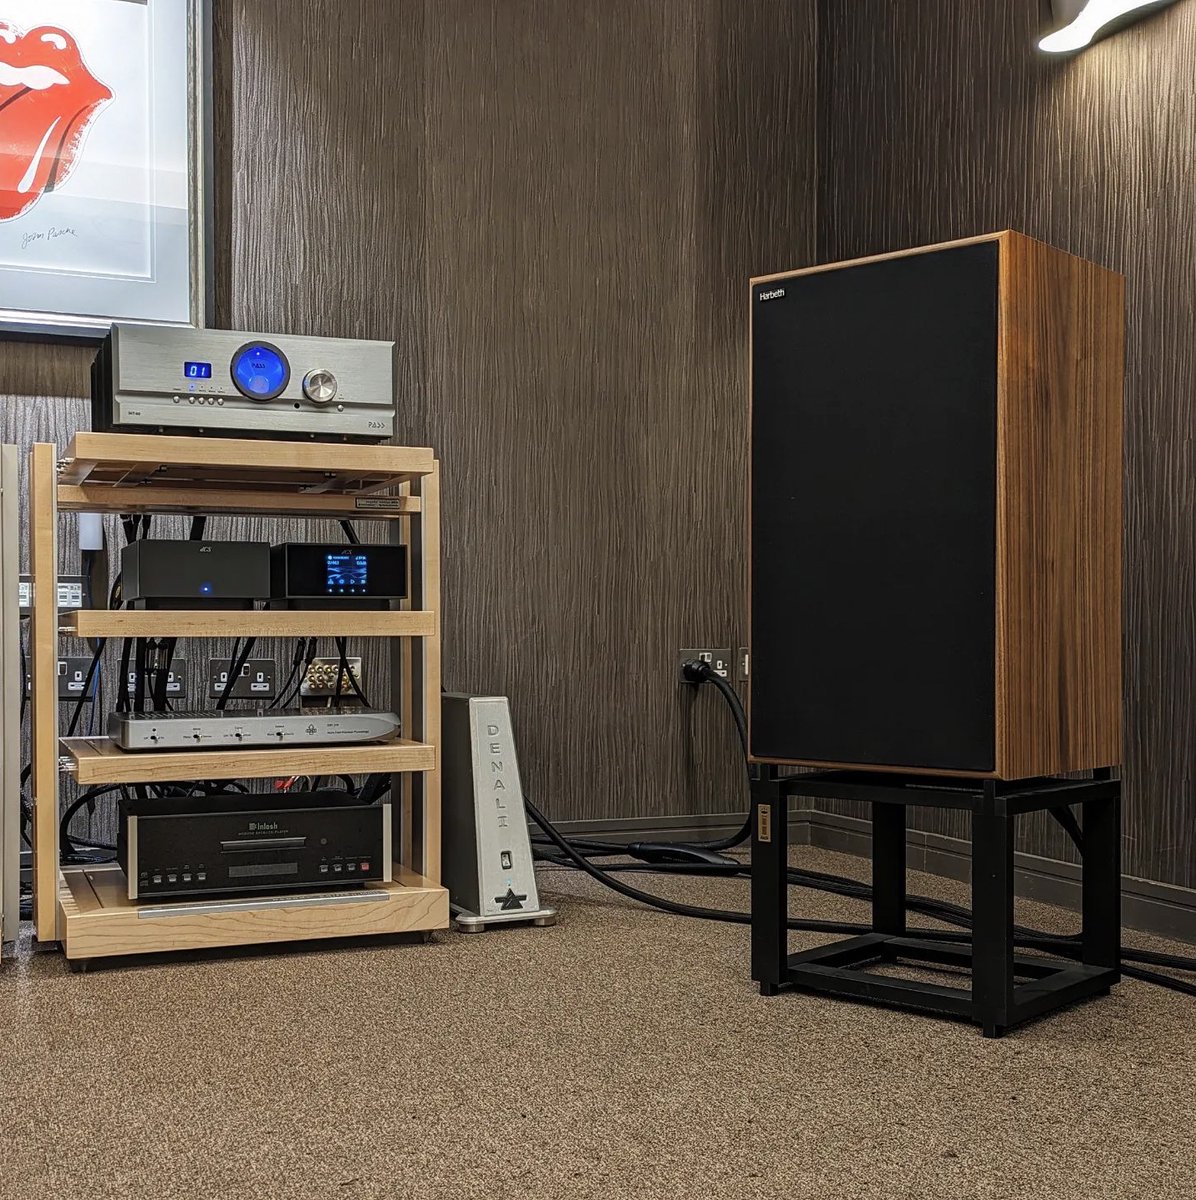 The #dCSLina #DAC provides the source for a demo @kjwestonelondon, paired with speakers from #HarbethAudio and #PassLabs amplification.

The Lina #MasterClock adds a further performance upgrade.

Find a dealer near you to demo dCS Lina: dcsaudio.com/dealer-locator